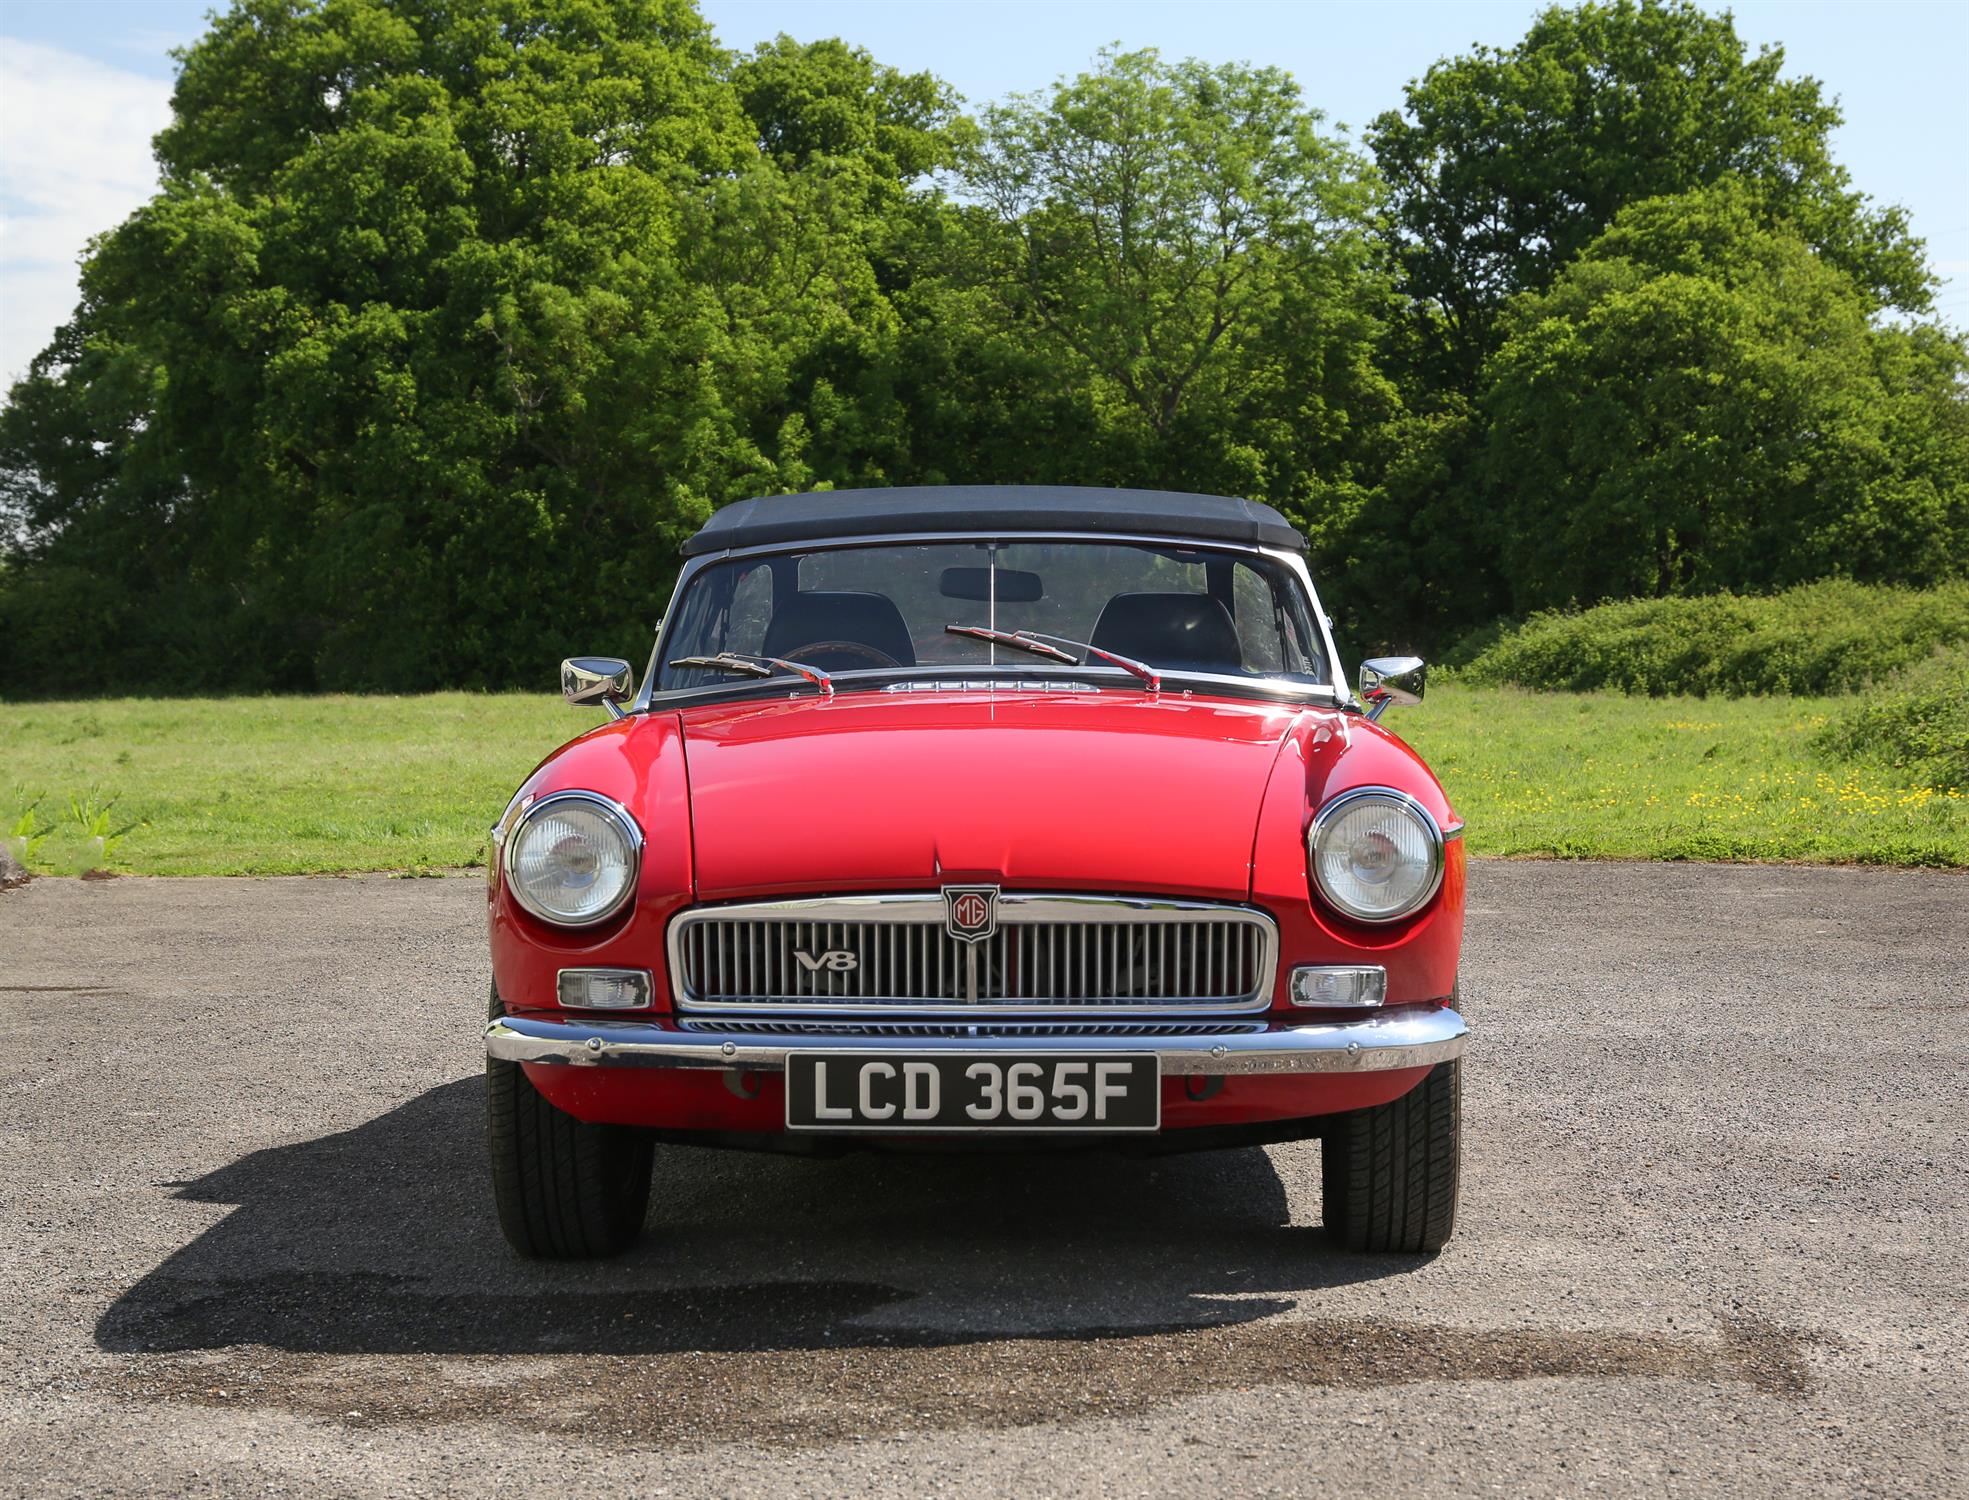 1968 MGB. Registration number LCD 365F - Fully rebuilt in 1997, with major refurbishment in 2019 - Image 5 of 6